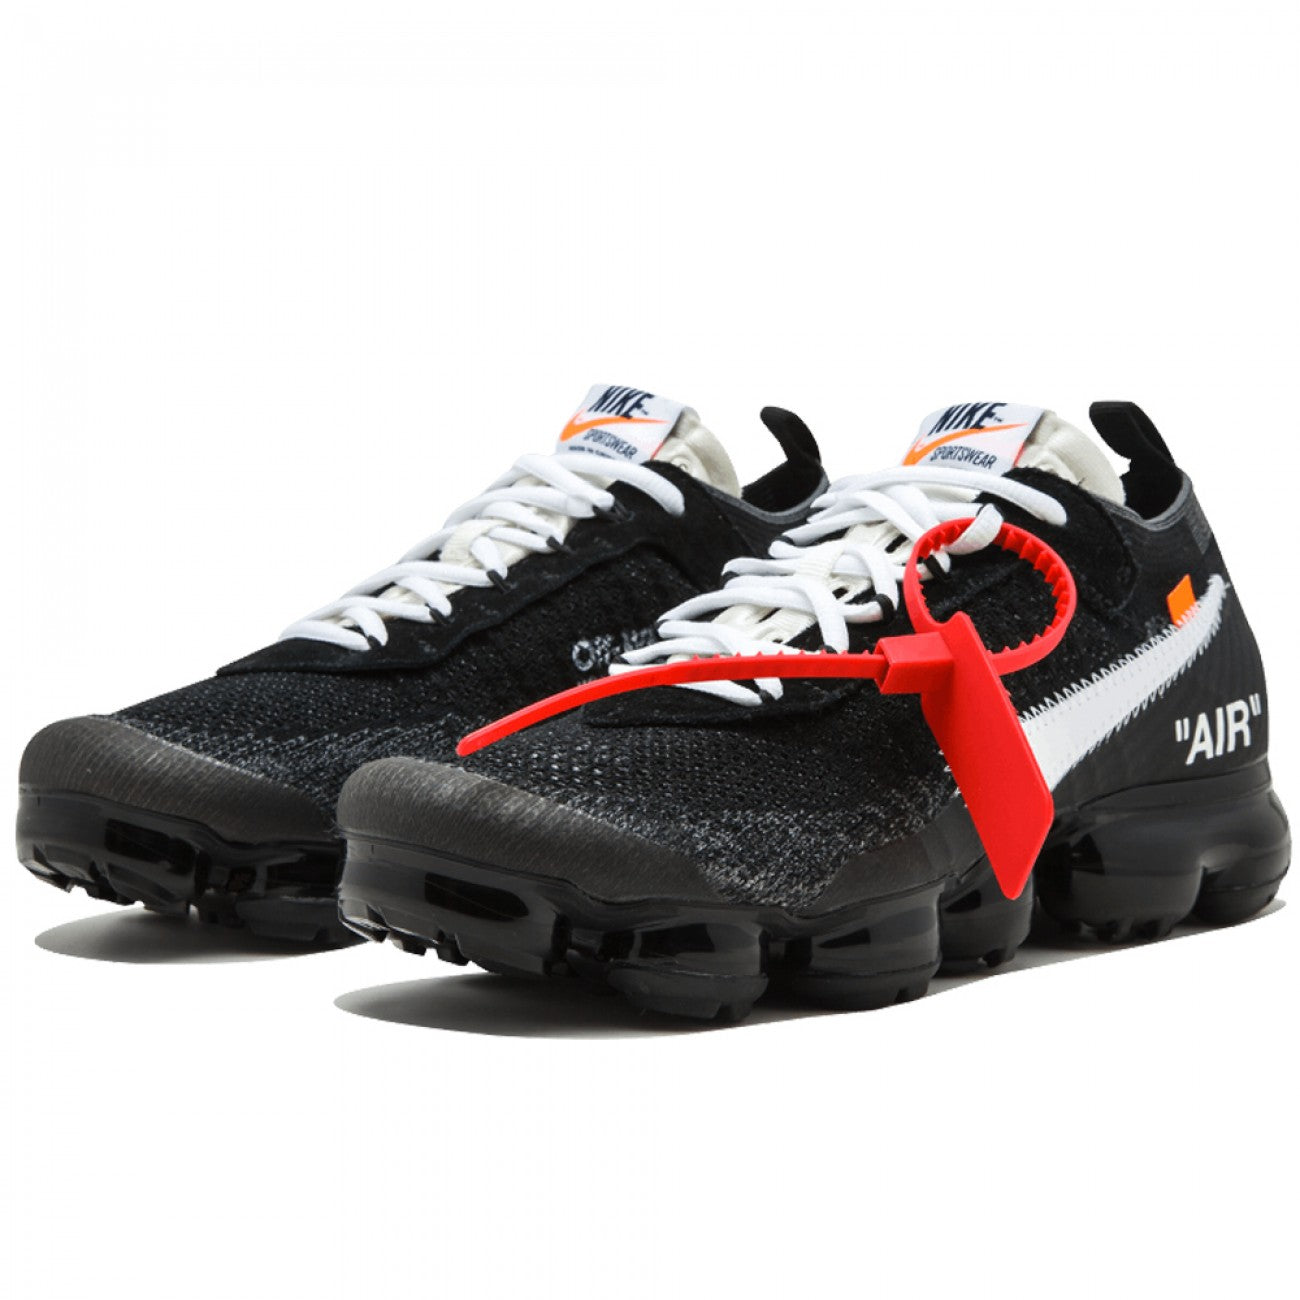 THE 10: NIKE AIR VAPORMAX FK "OFF-WHITE" – THE KICKERS